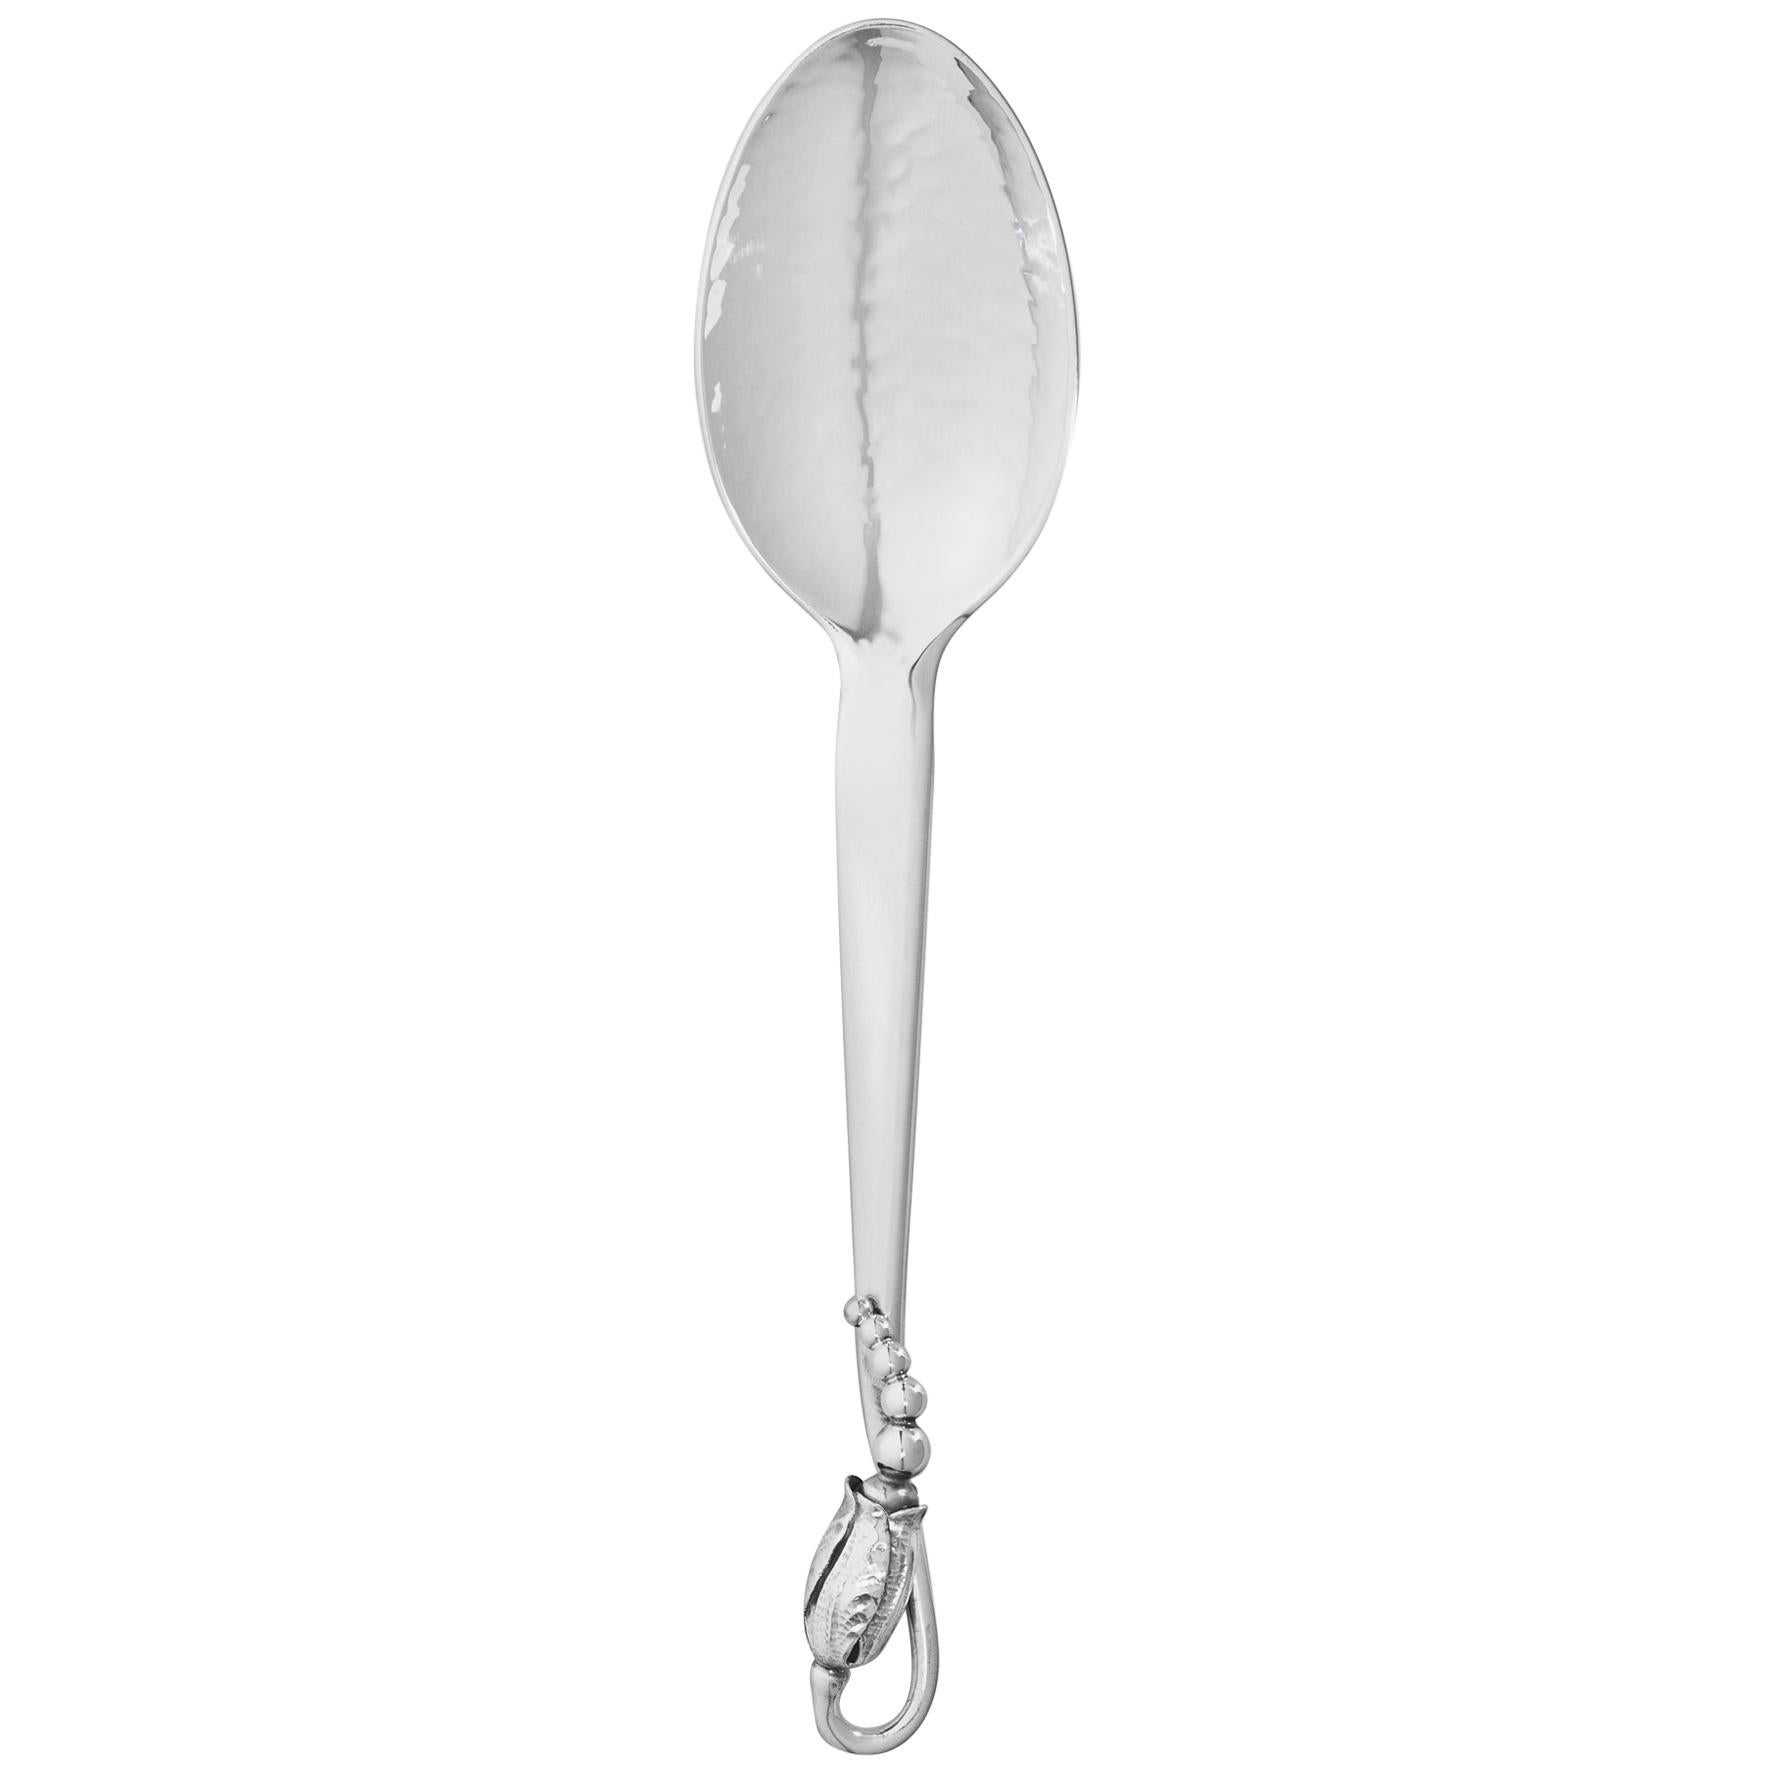 Georg Jensen Handcrafted Sterling Silver Blossom Child's Teaspoon For Sale